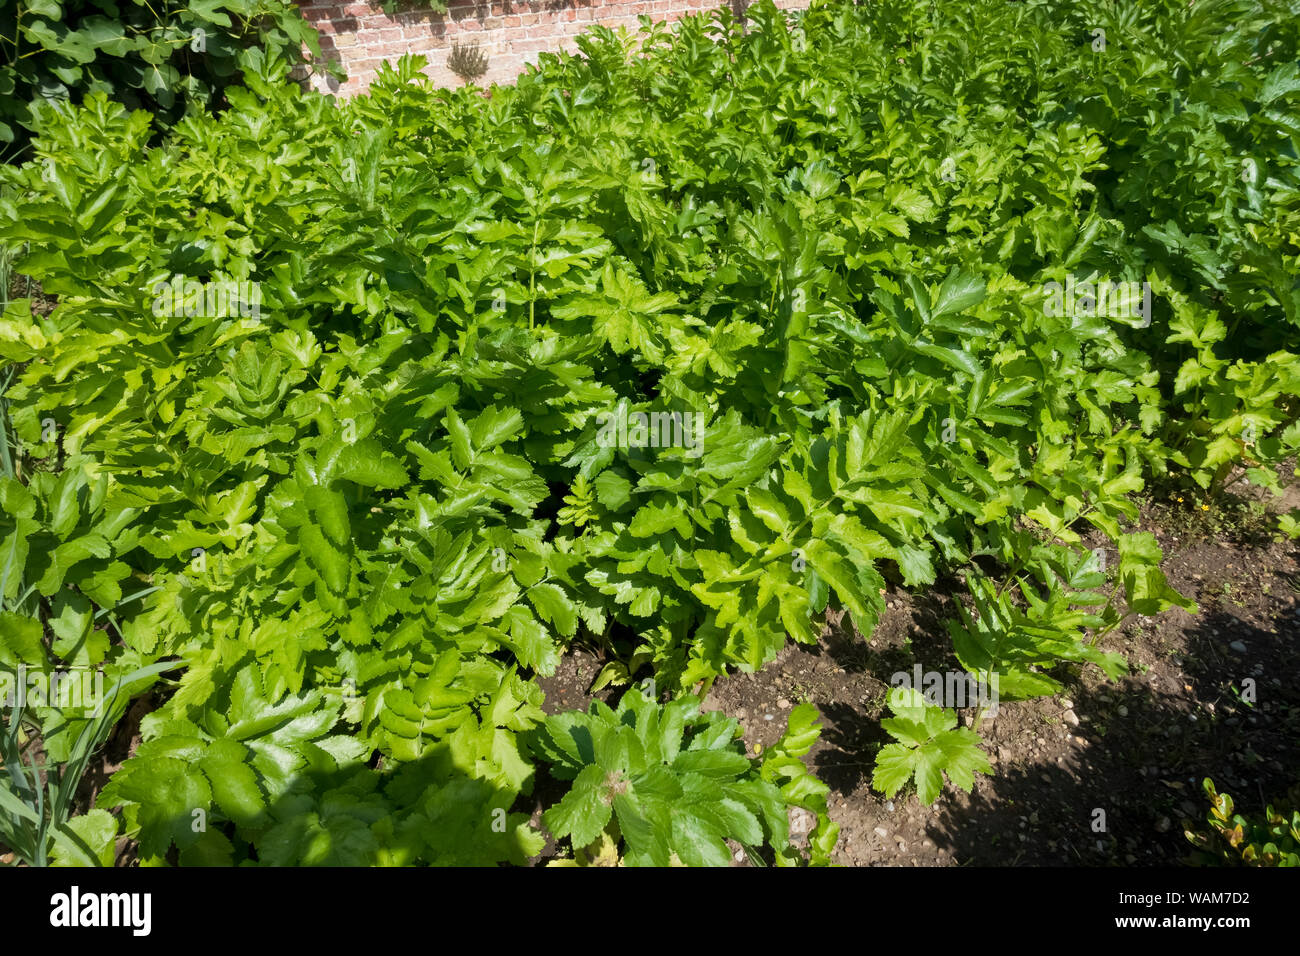 Parsnips White Gem parsnip plant plants (pastinaca sativa) growing on an allotment garden in summer England UK United Kingdom GB Great Britain Stock Photo